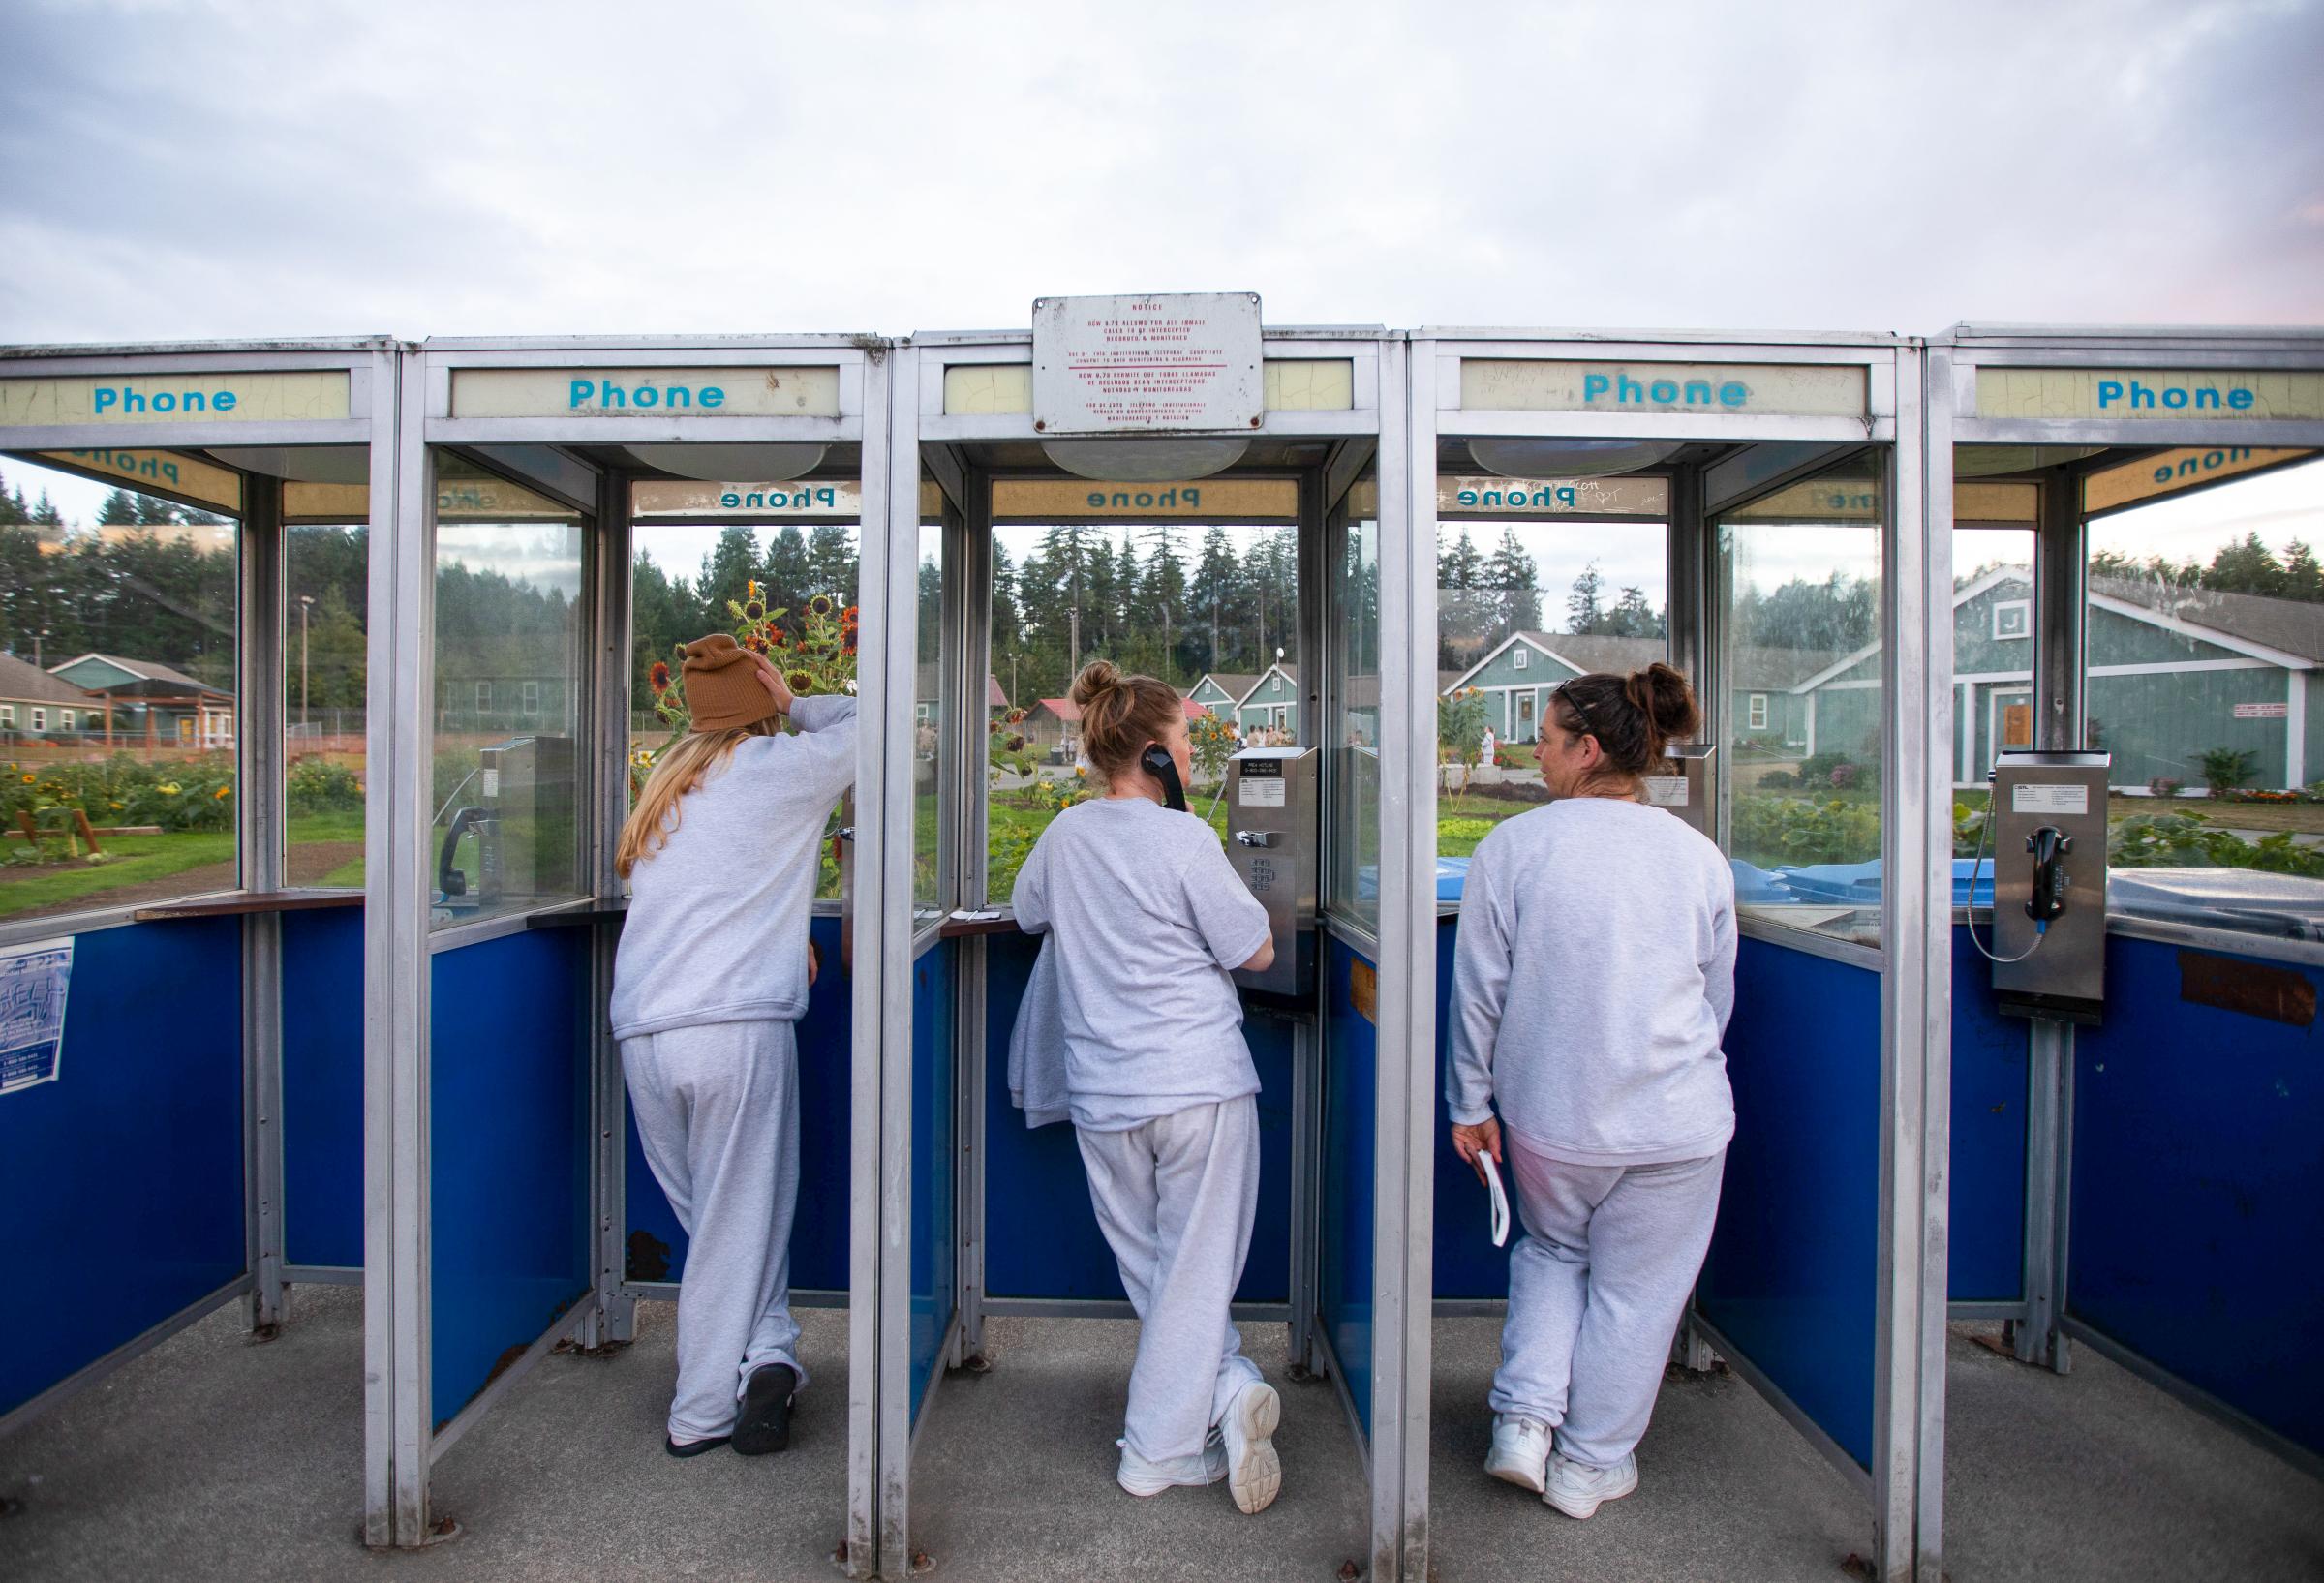 Babies Behind Bars - Inmates using the payphone booth outside the Women's...